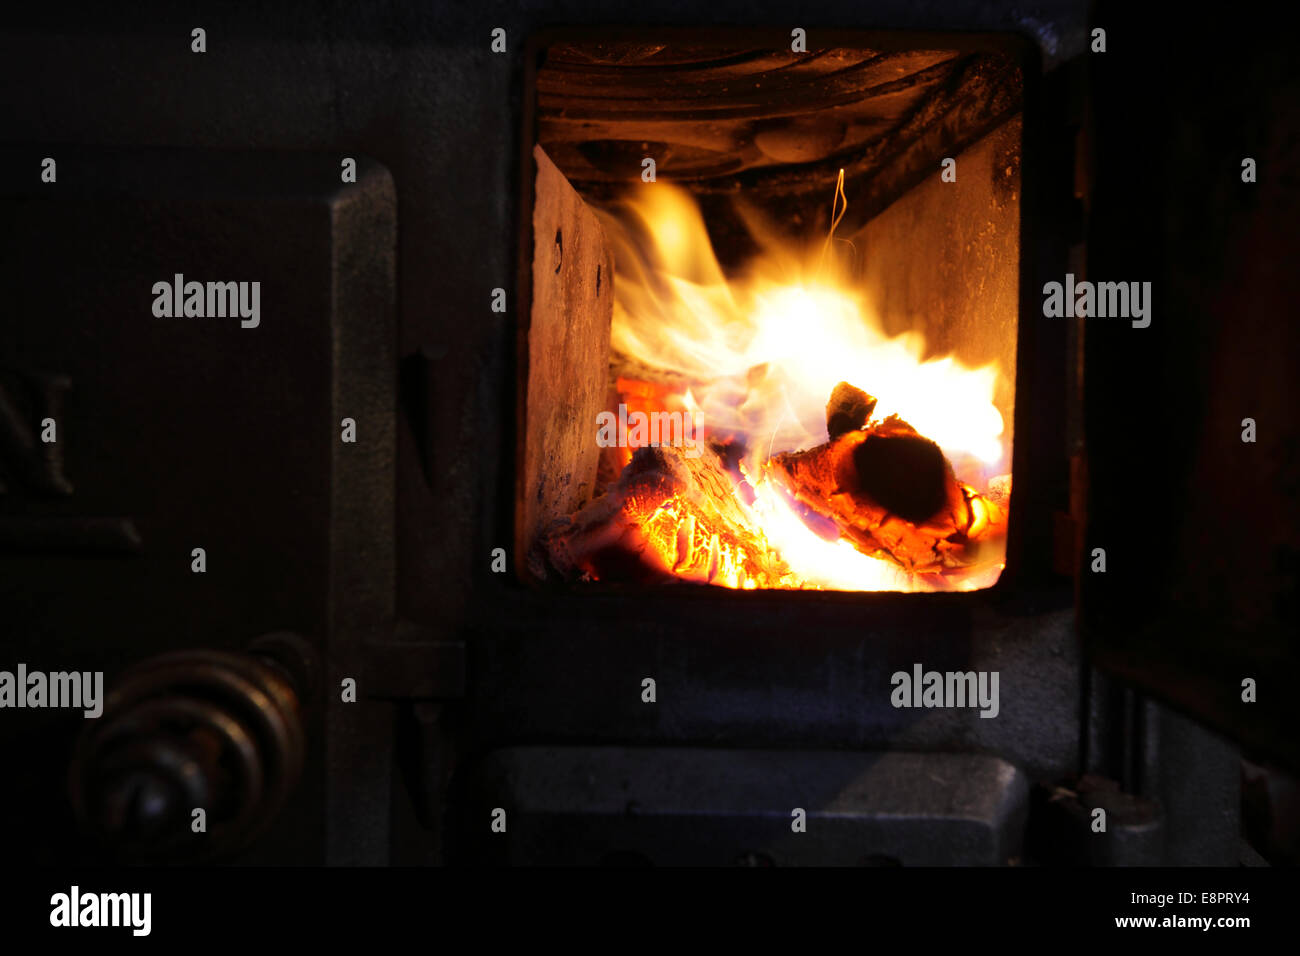 Fire burning in an old wood stove. Stock Photo